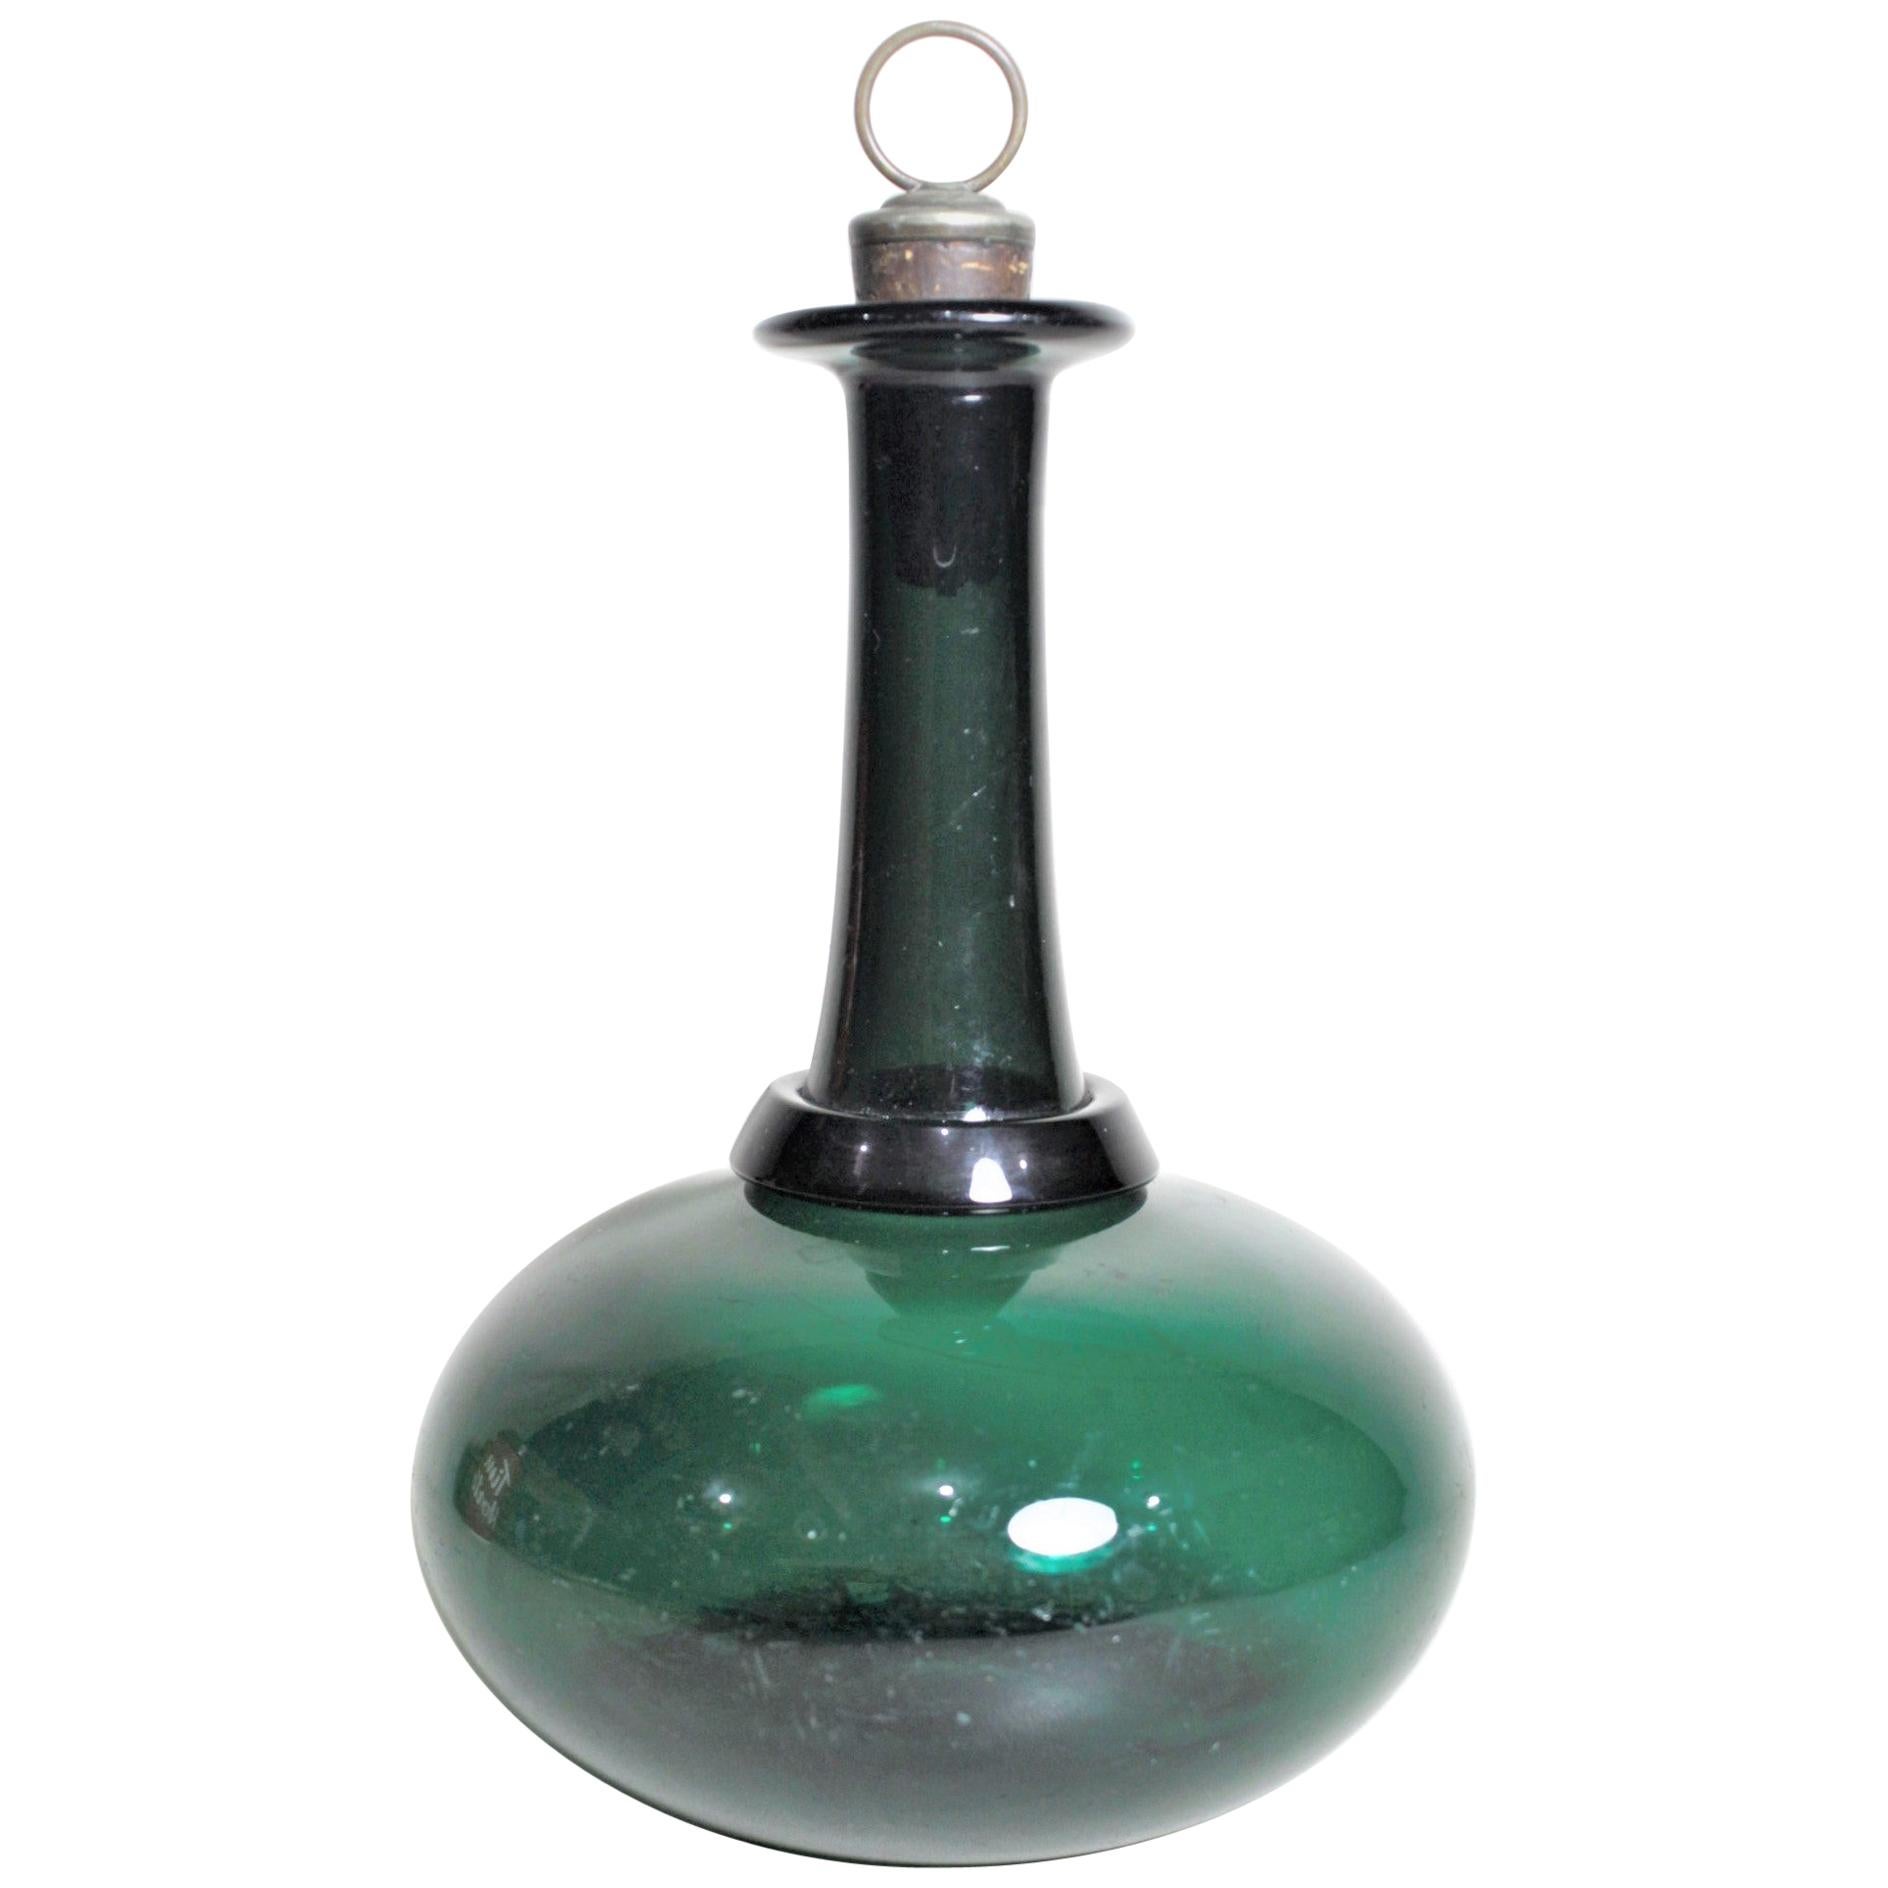 Antique Emerald Green English Bottle Decanter with Cork Stopper